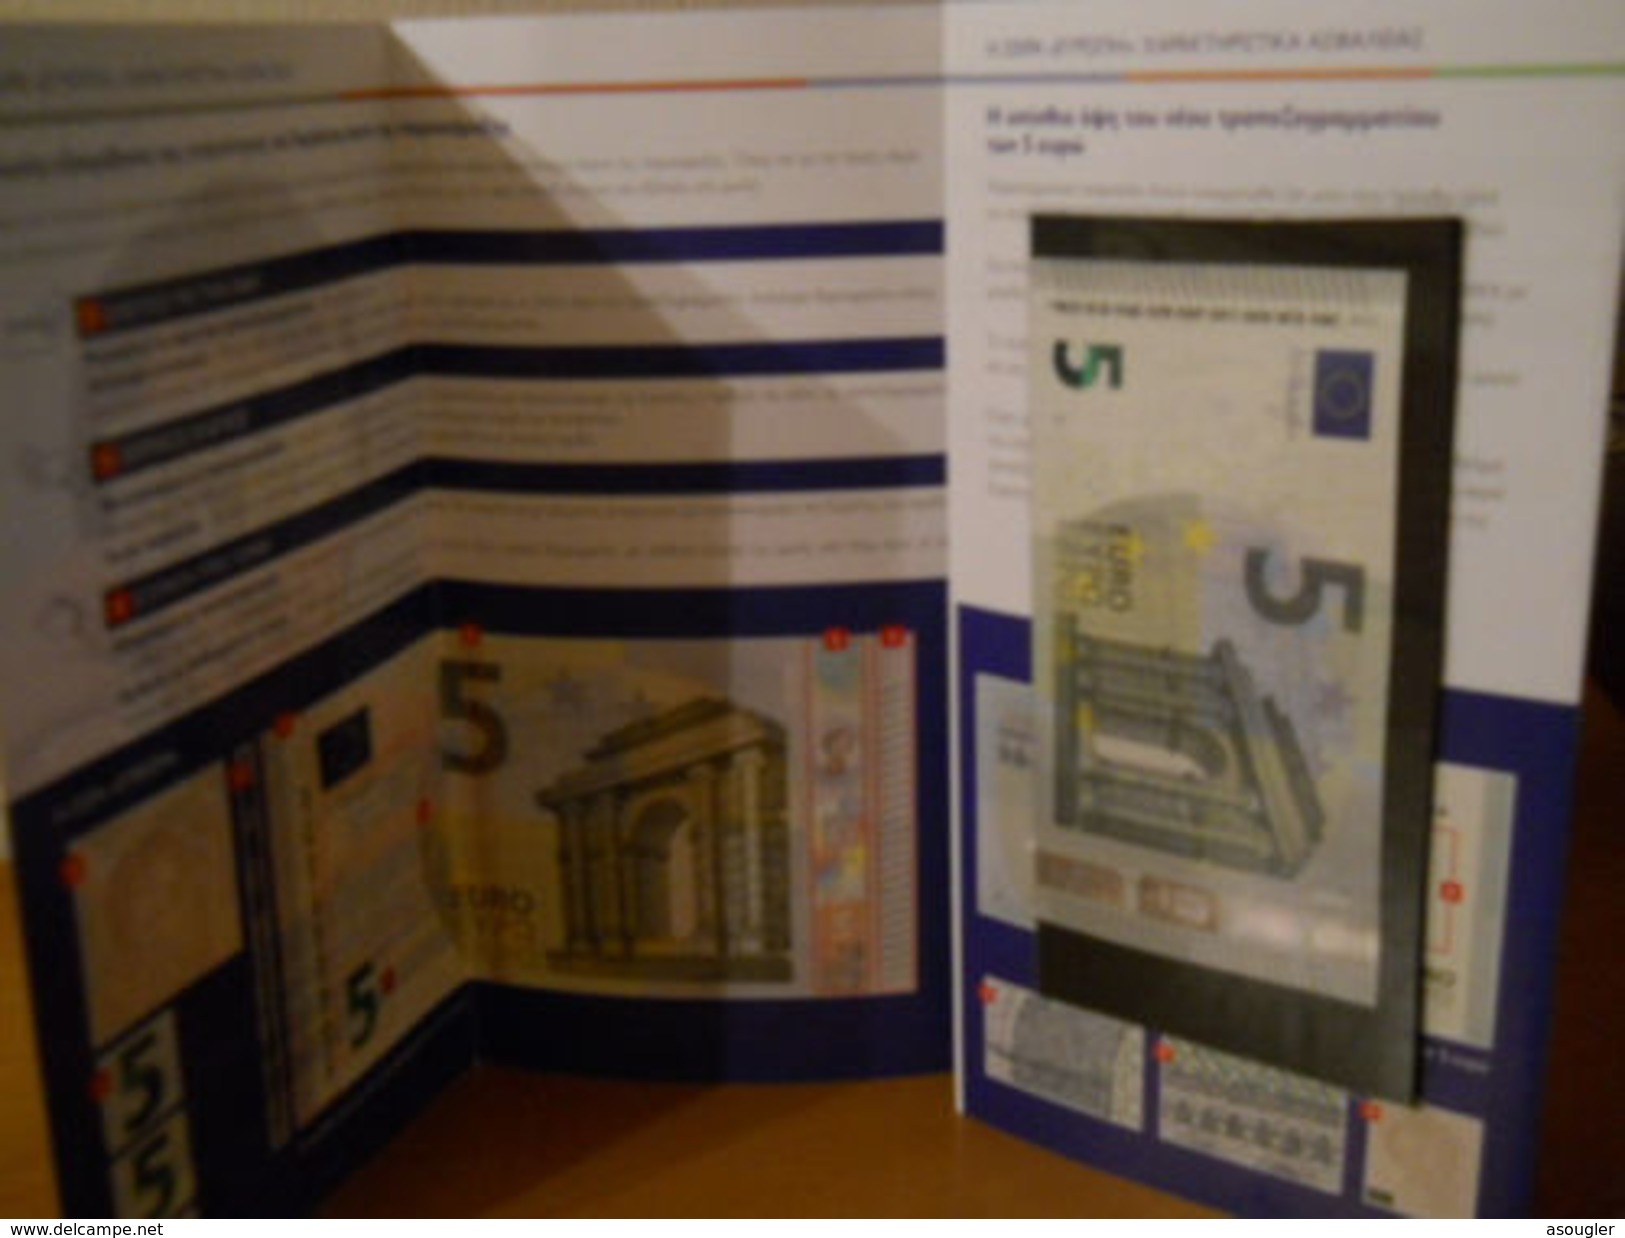 GREEK FOLDER ON ITALY 5 EURO NEW 2013 (ITALY ISSUE) LETTER "S" UNC - 5 Euro